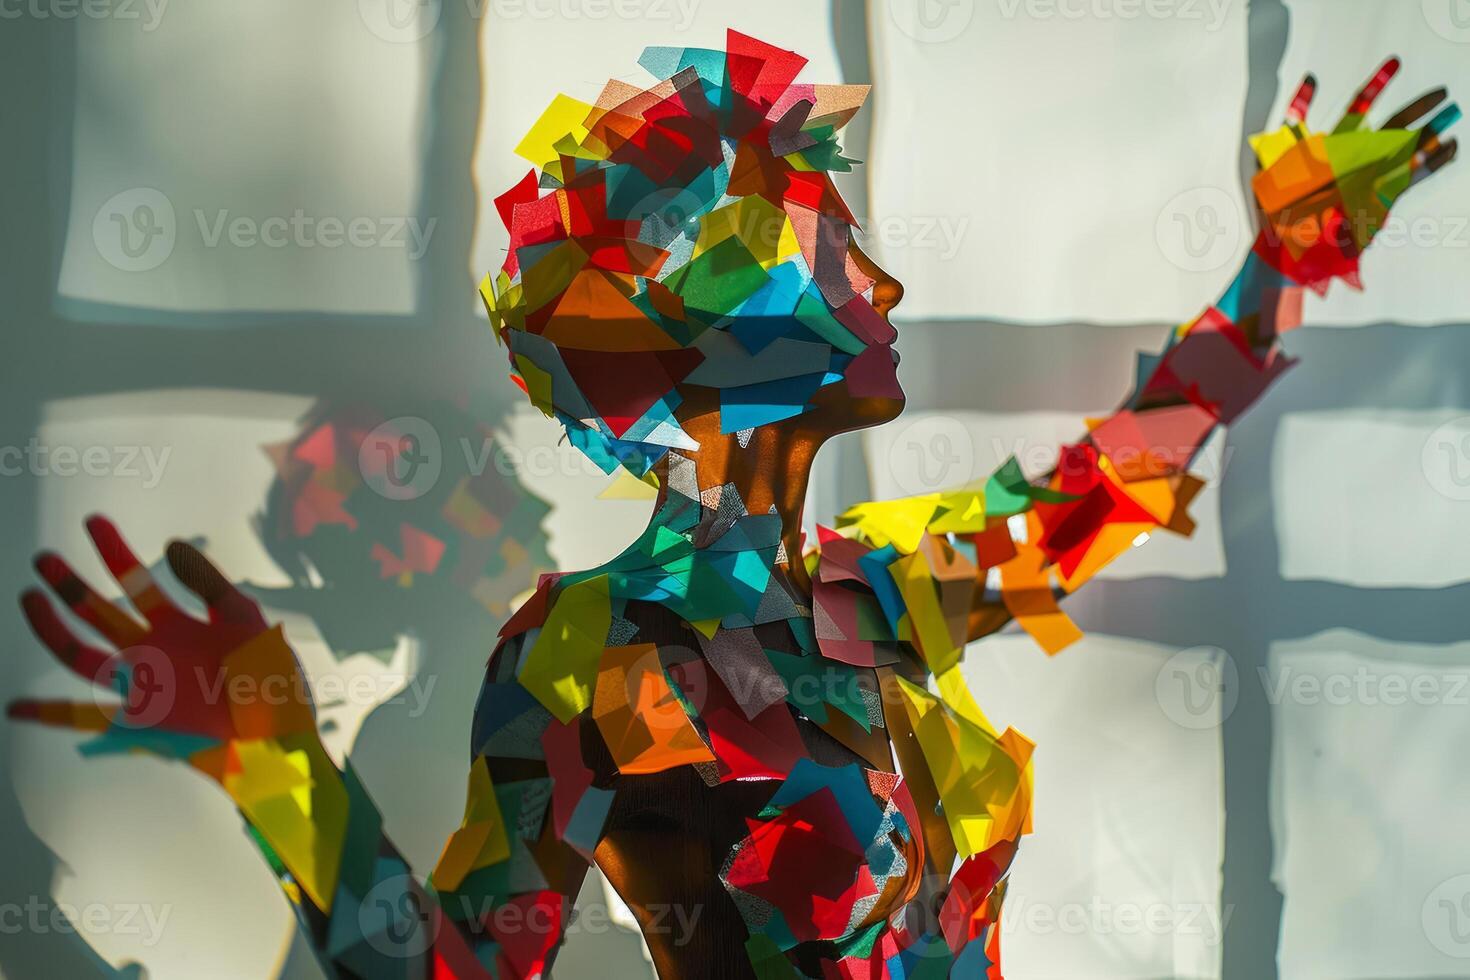 The woman is wearing a colorful outfit and has a colorful face. The image is a collage of different colored pieces of paper photo